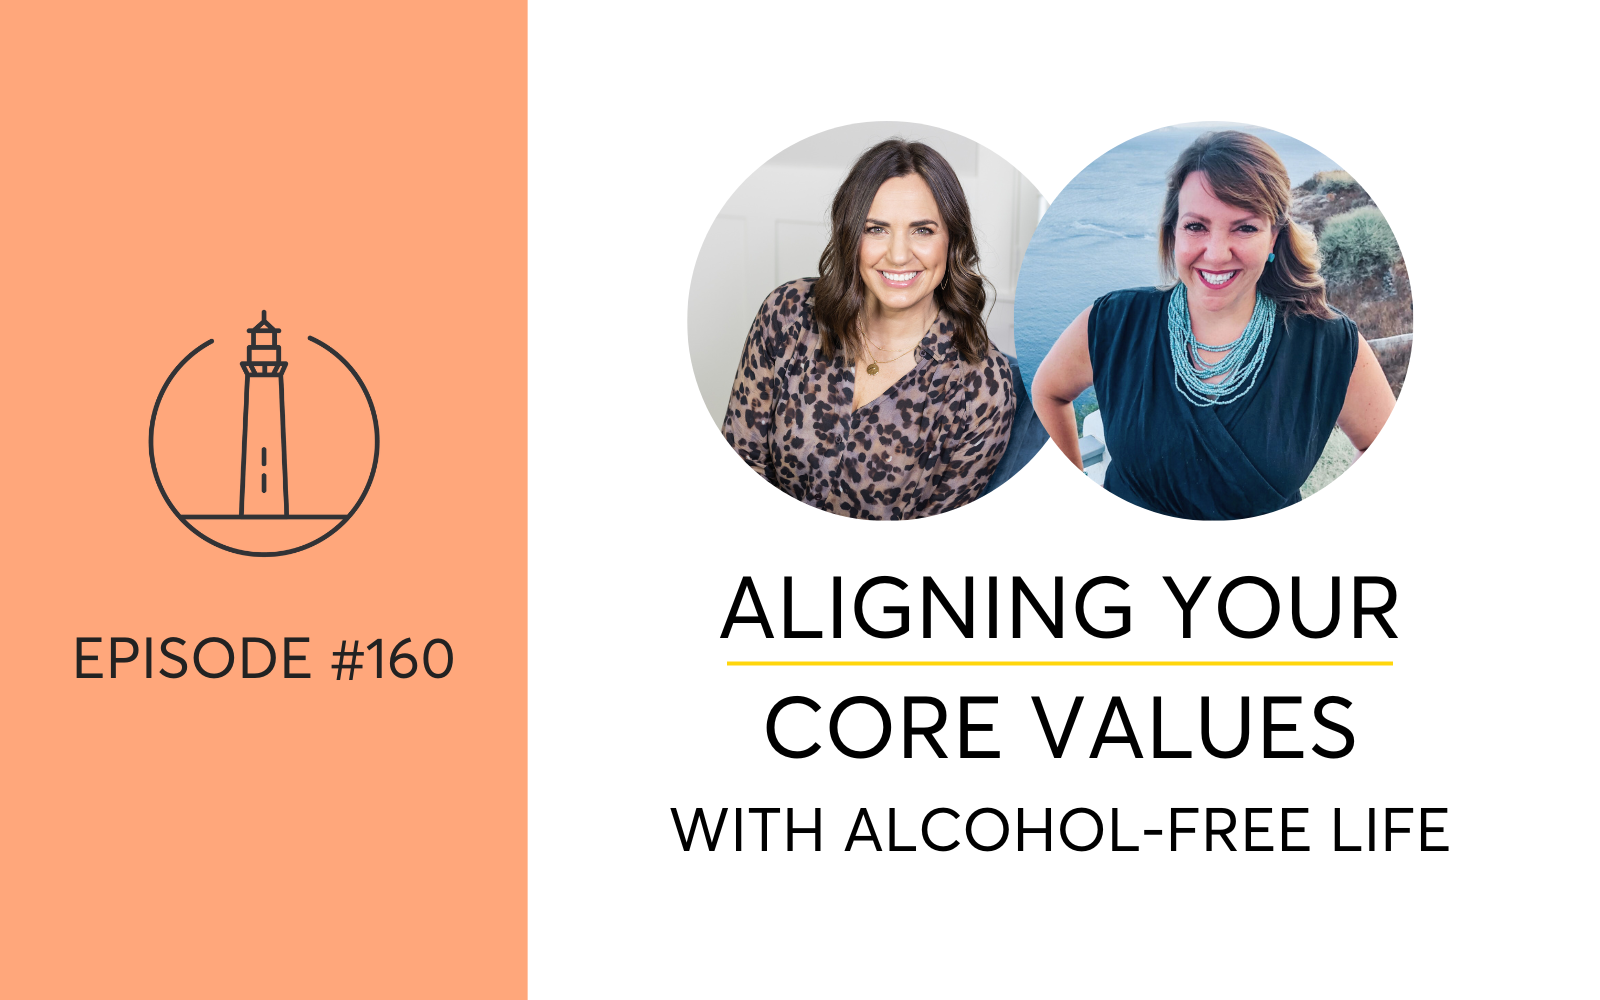 Aligning Your Core Values With Alcohol-Free Life